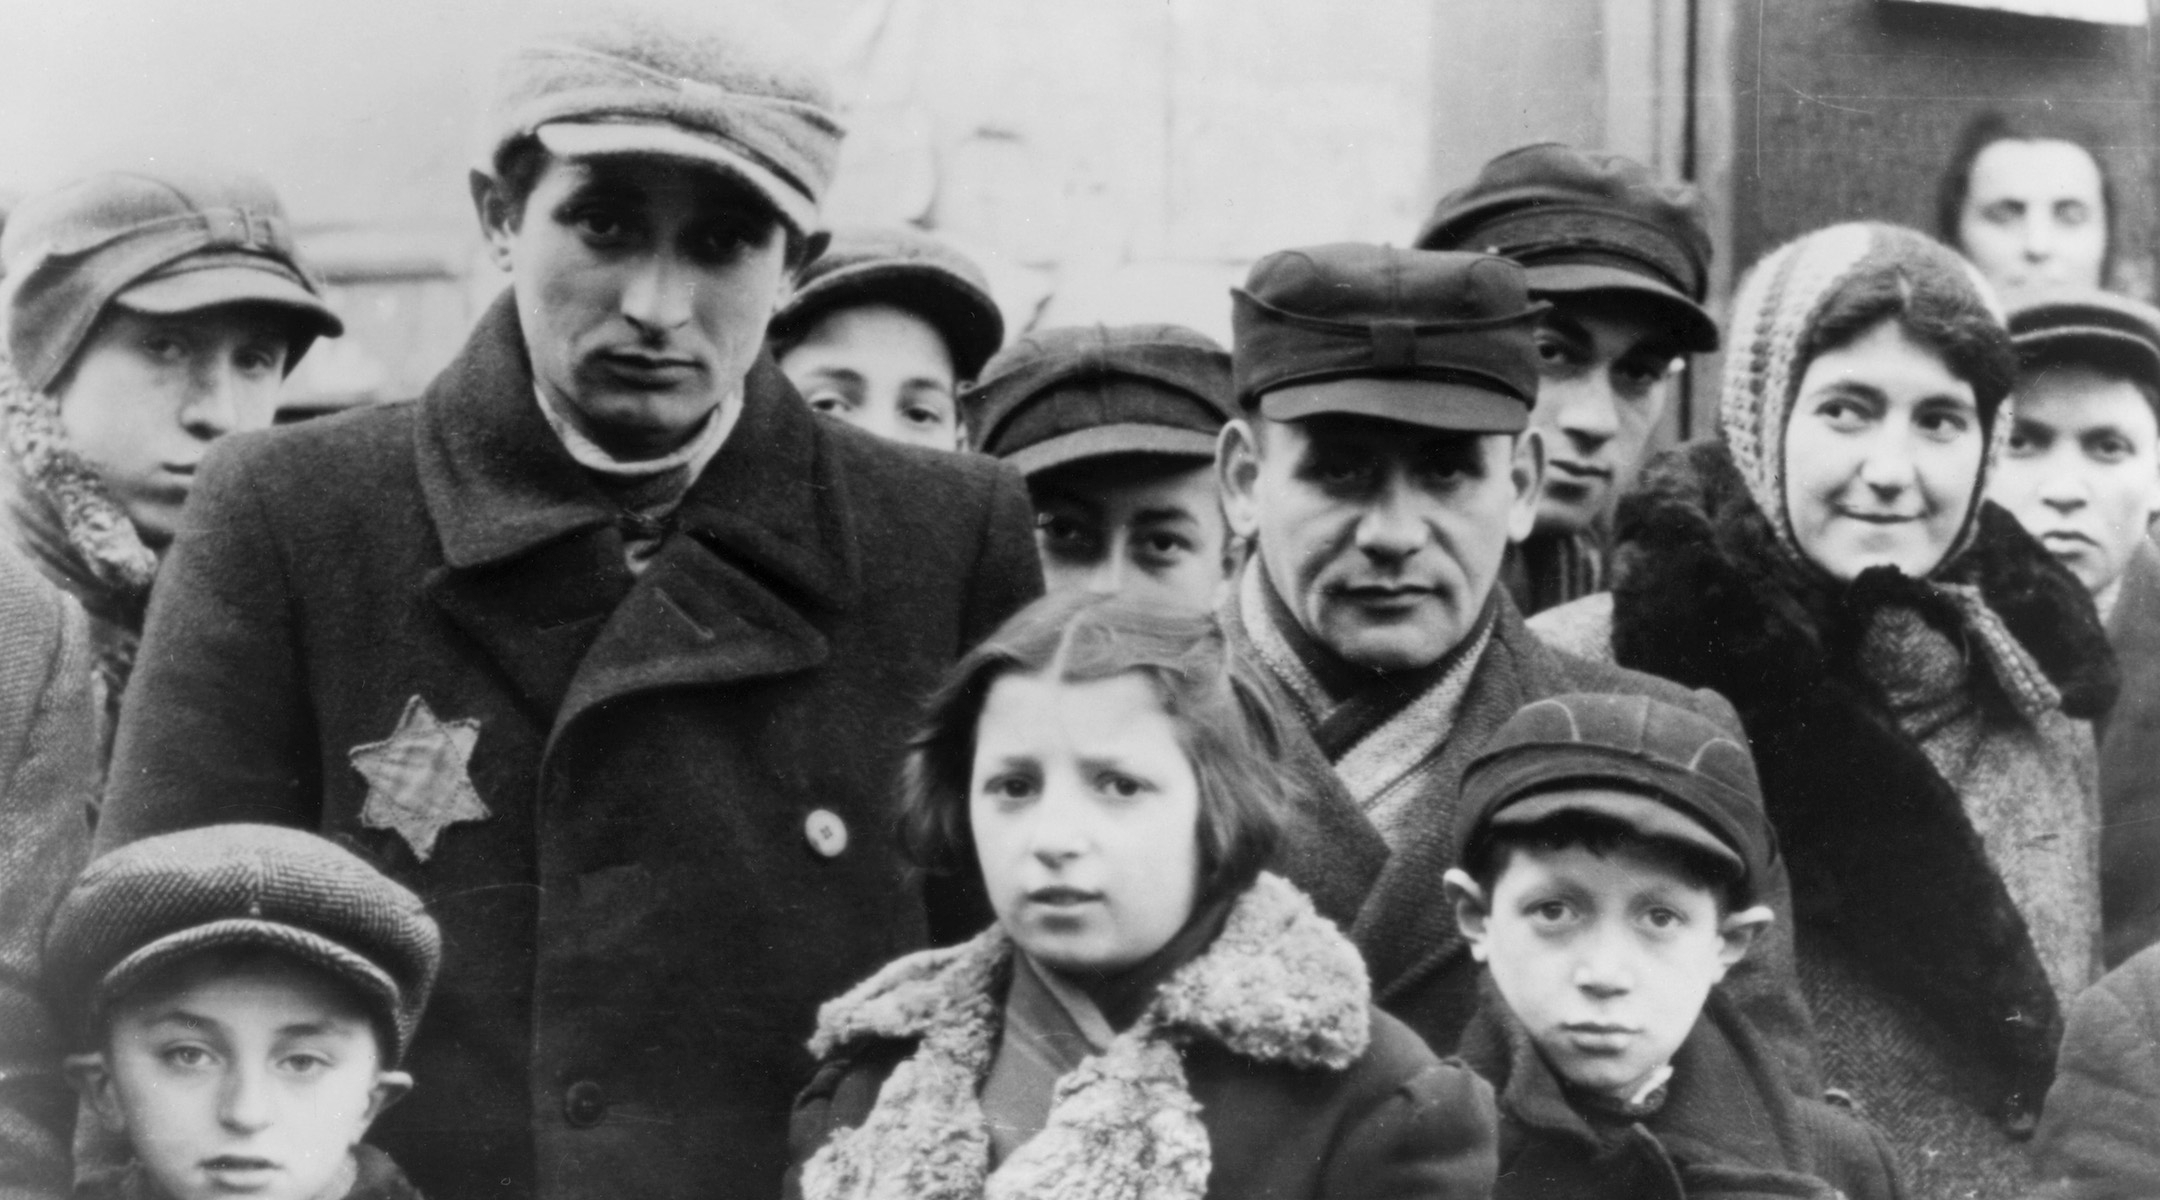 Jews wearing Star of David badges in the Lodz Ghetto in Poland. (Jewish Chronicle/Heritage Images/Getty Images)